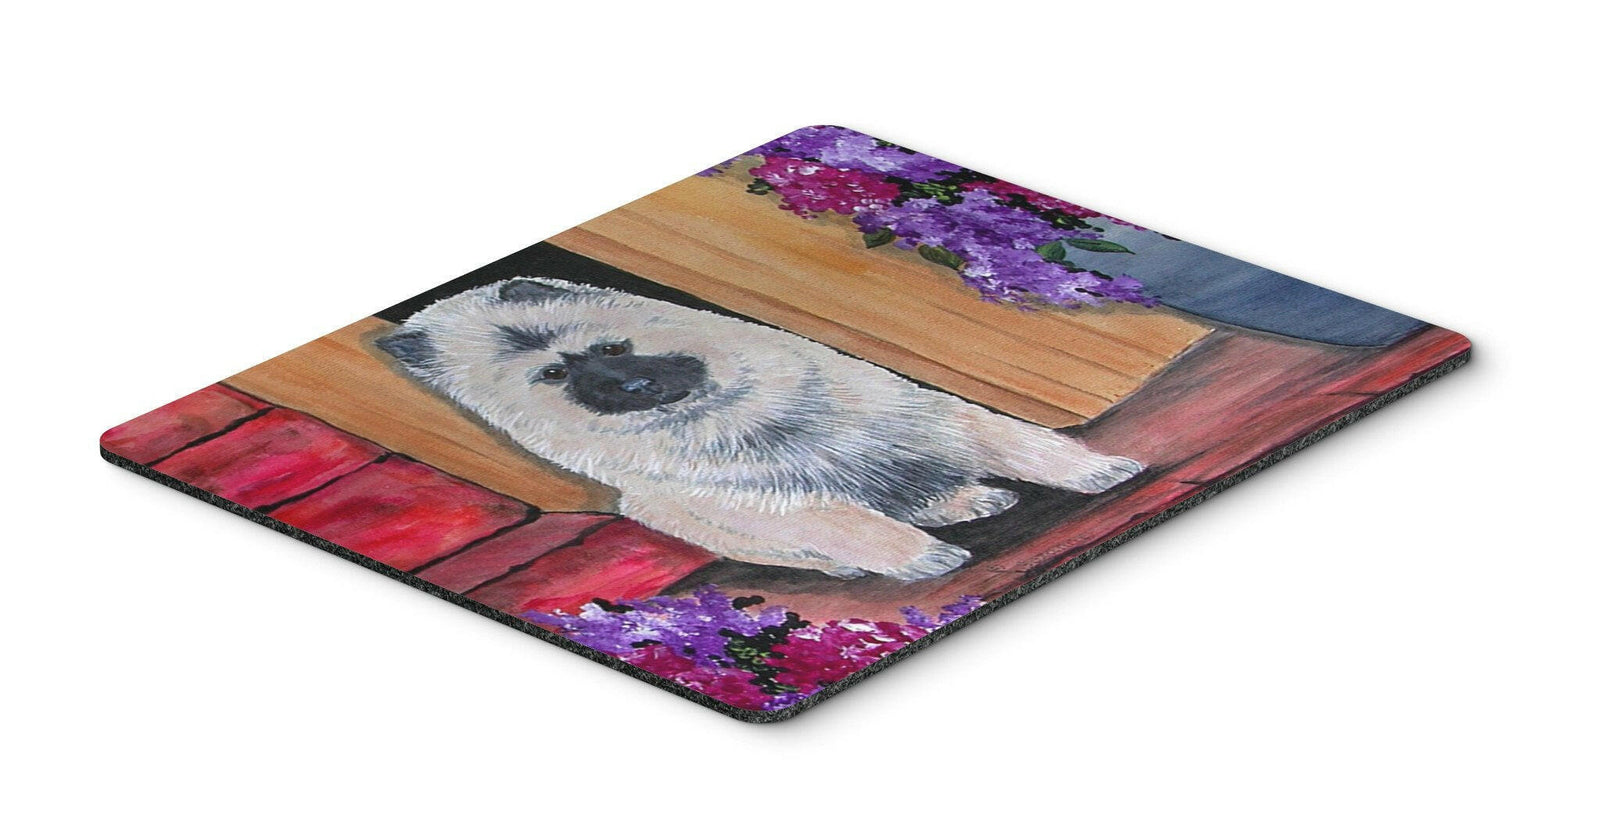 Keeshond Mouse pad, hot pad, or trivet by Caroline's Treasures